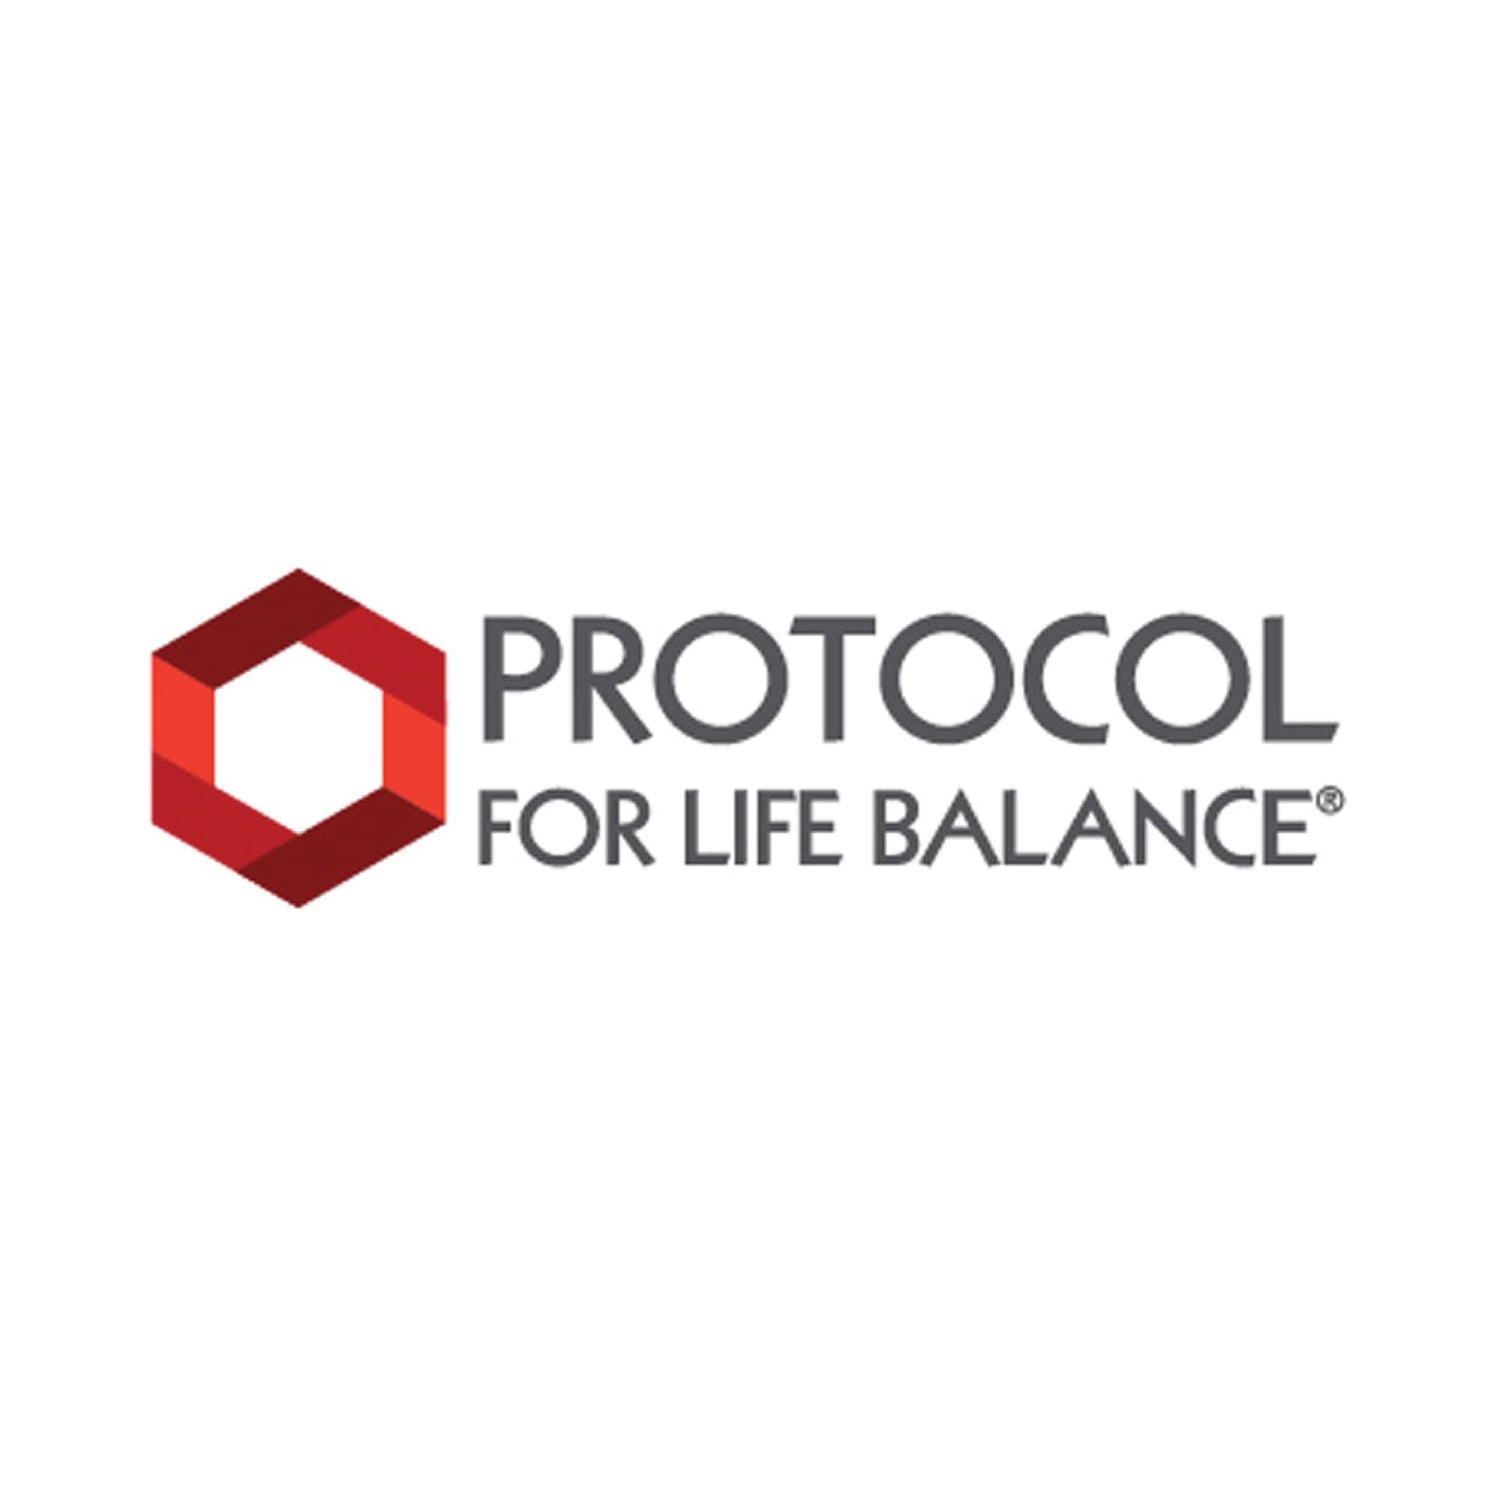 Protocol for Life Balance, Milk Thistle Extract , 300 mg , 90 Veg Capsules - Bloom Concept